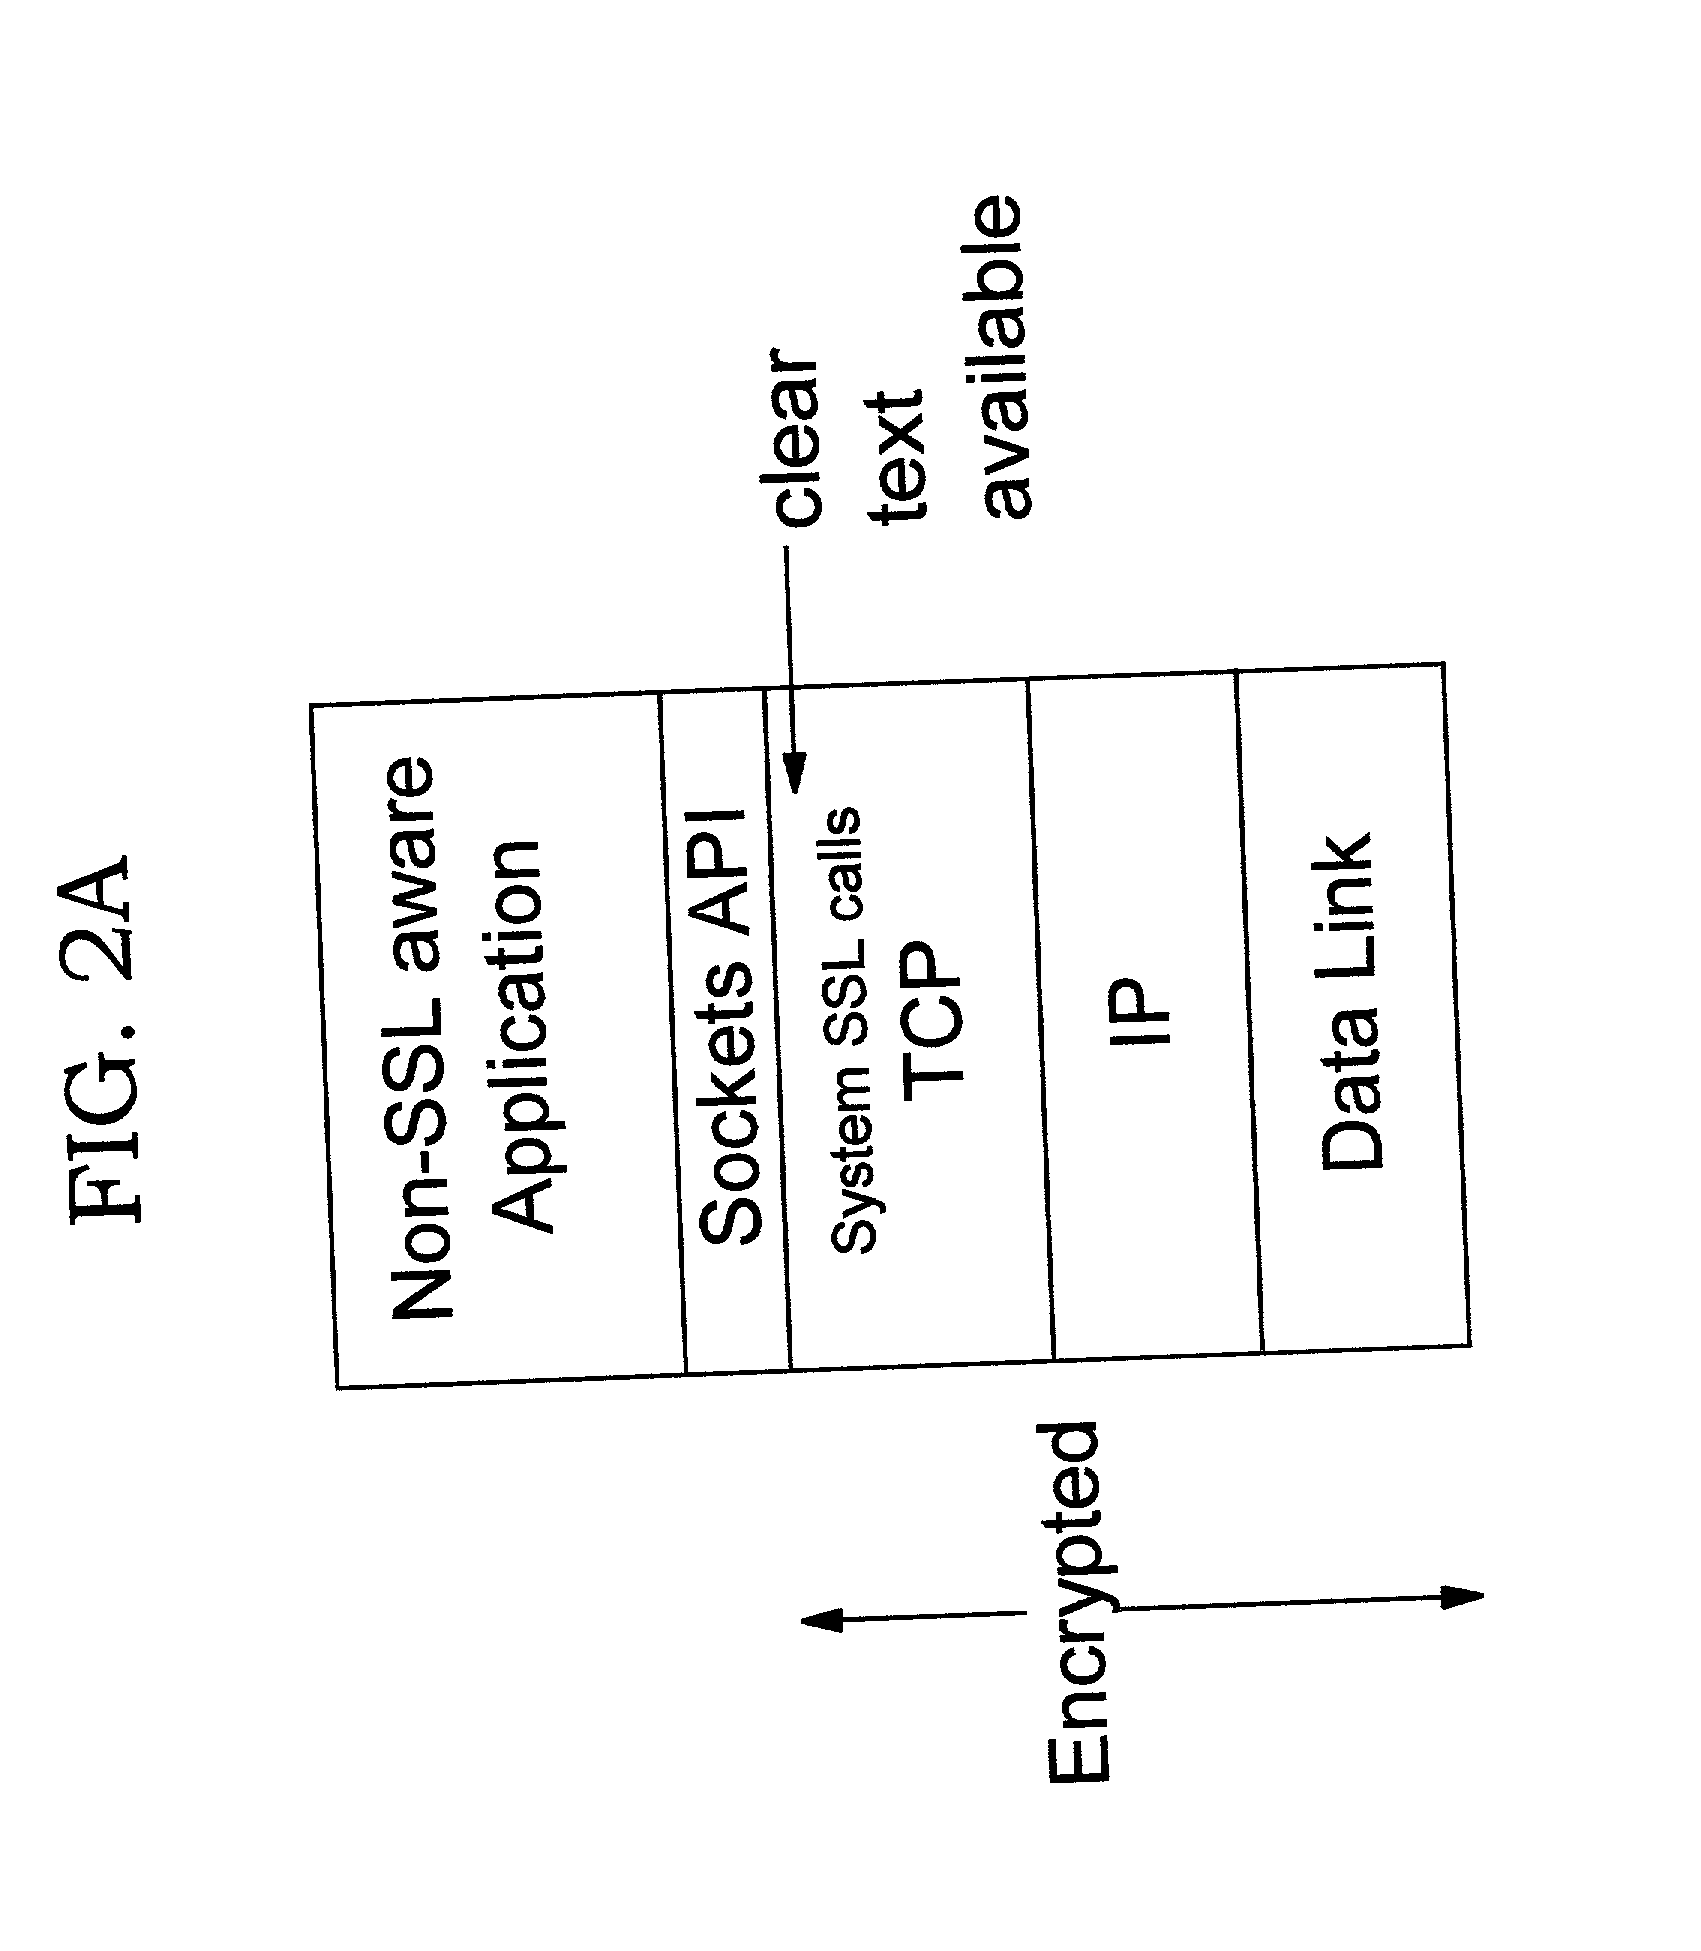 Offload processing for secure data transfer